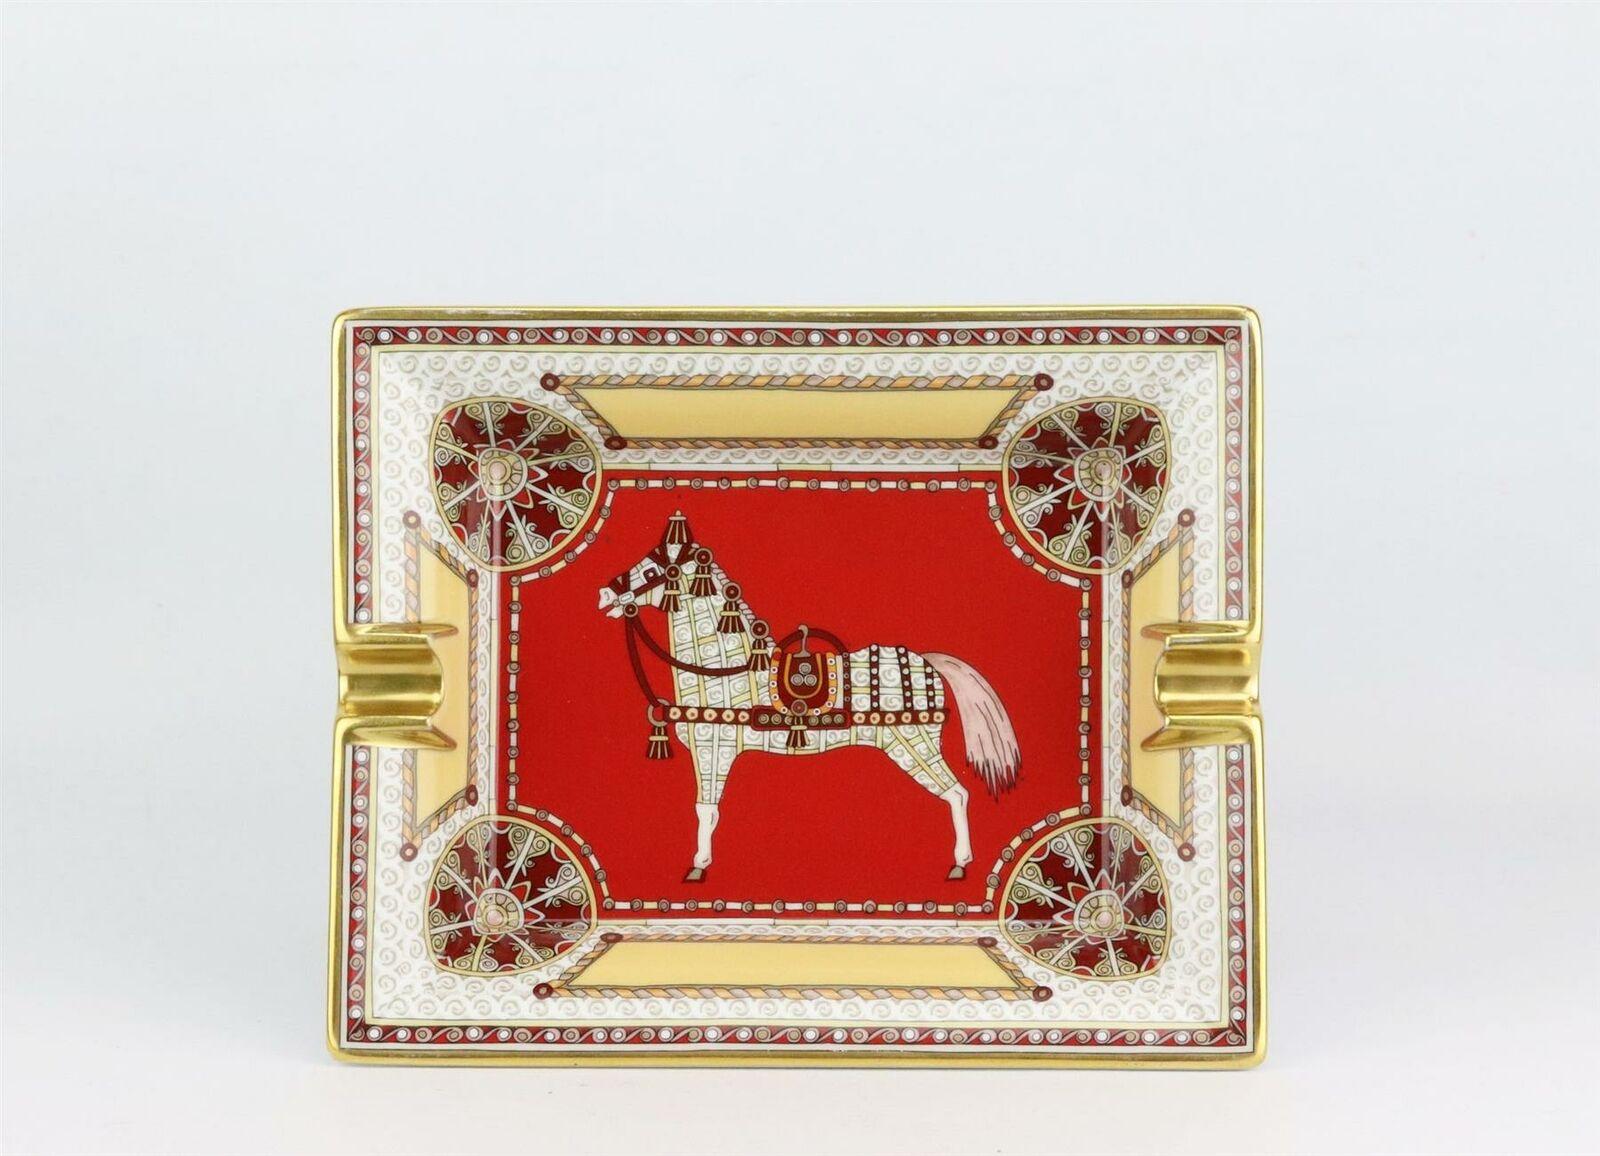 White, tonal red, gold and multi-coloured porcelain Hermès ‘Paperoles’ rectangular ashtray with quilled paper motif throughout, horse accent on a red base centre, gilt trims and suede brand stamp underside.
Does not come with box.

Dimensions: L